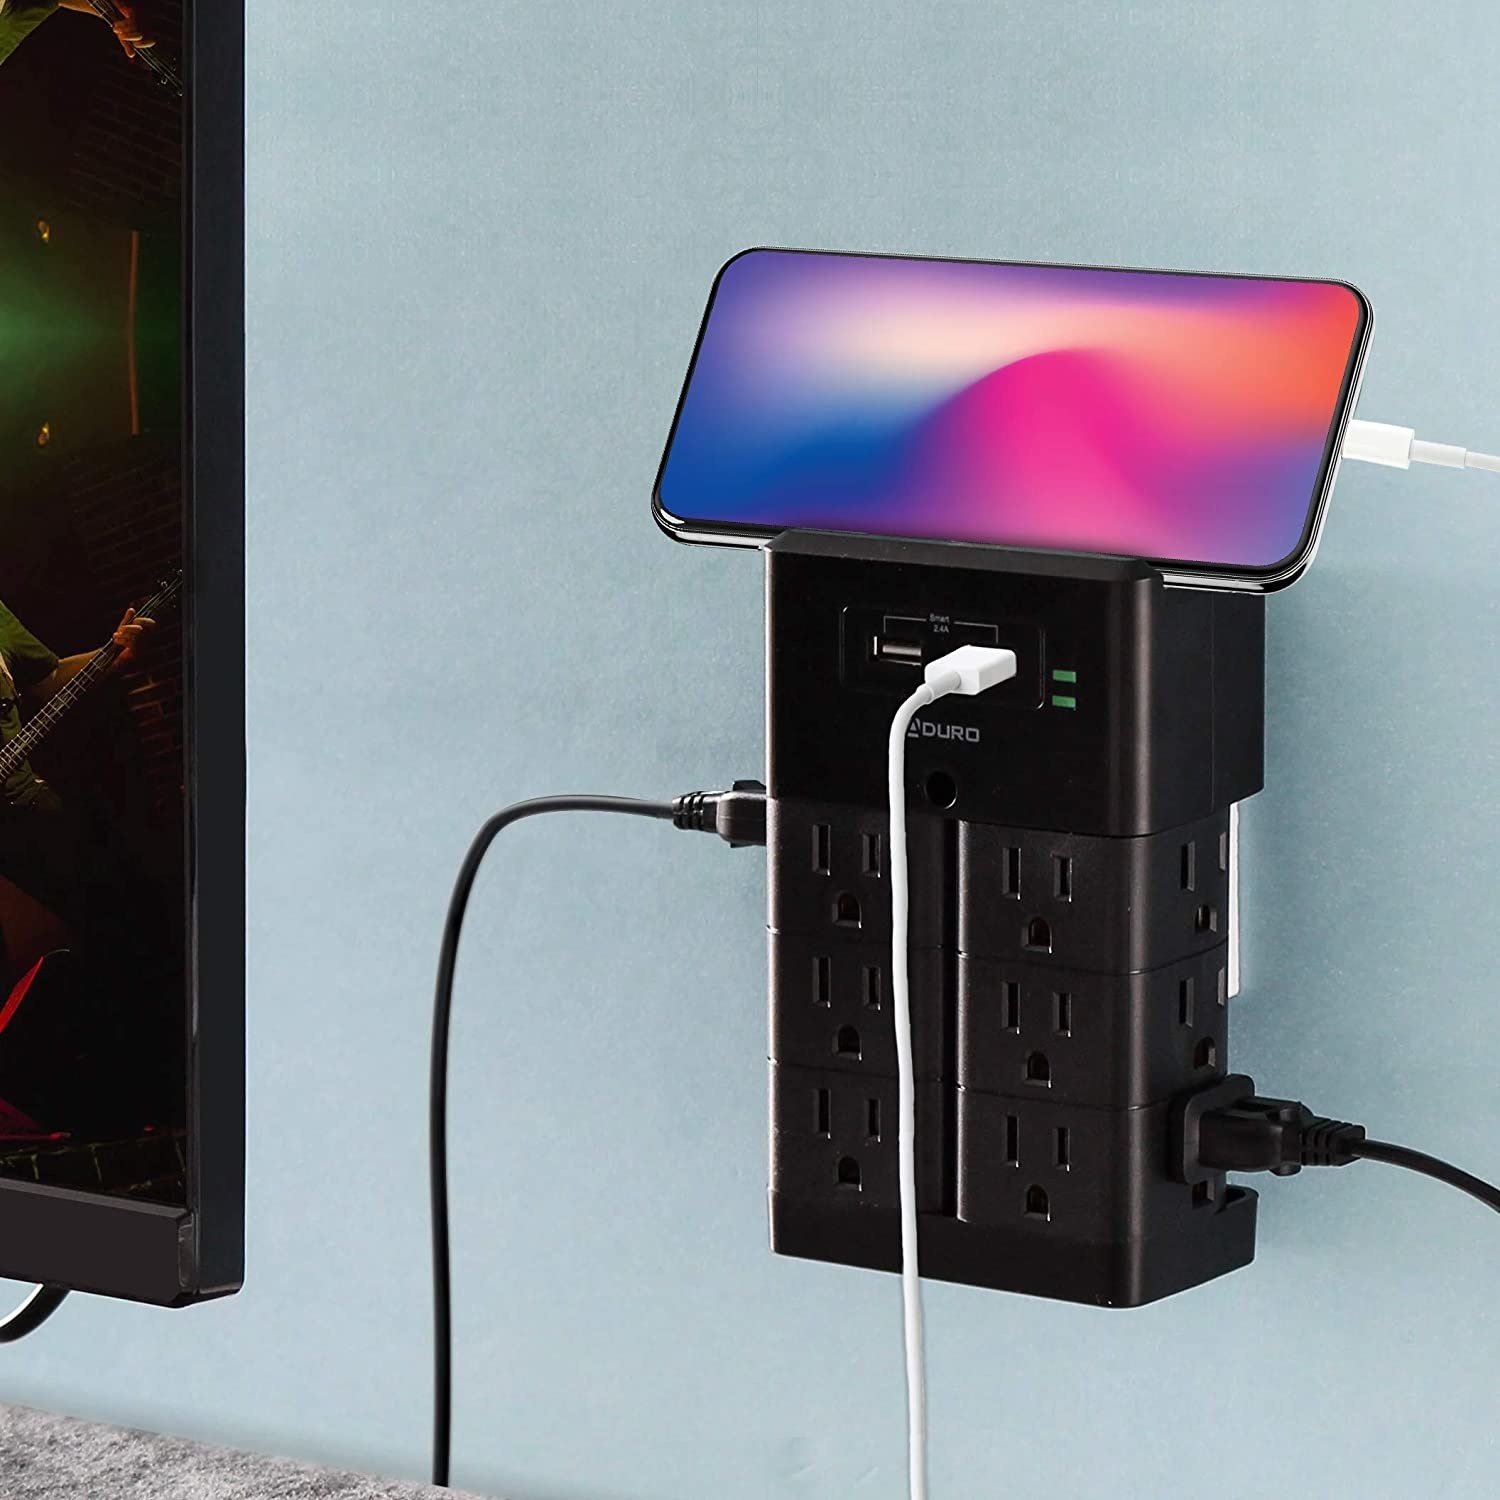 The power bank plugged into a wall next to a computer